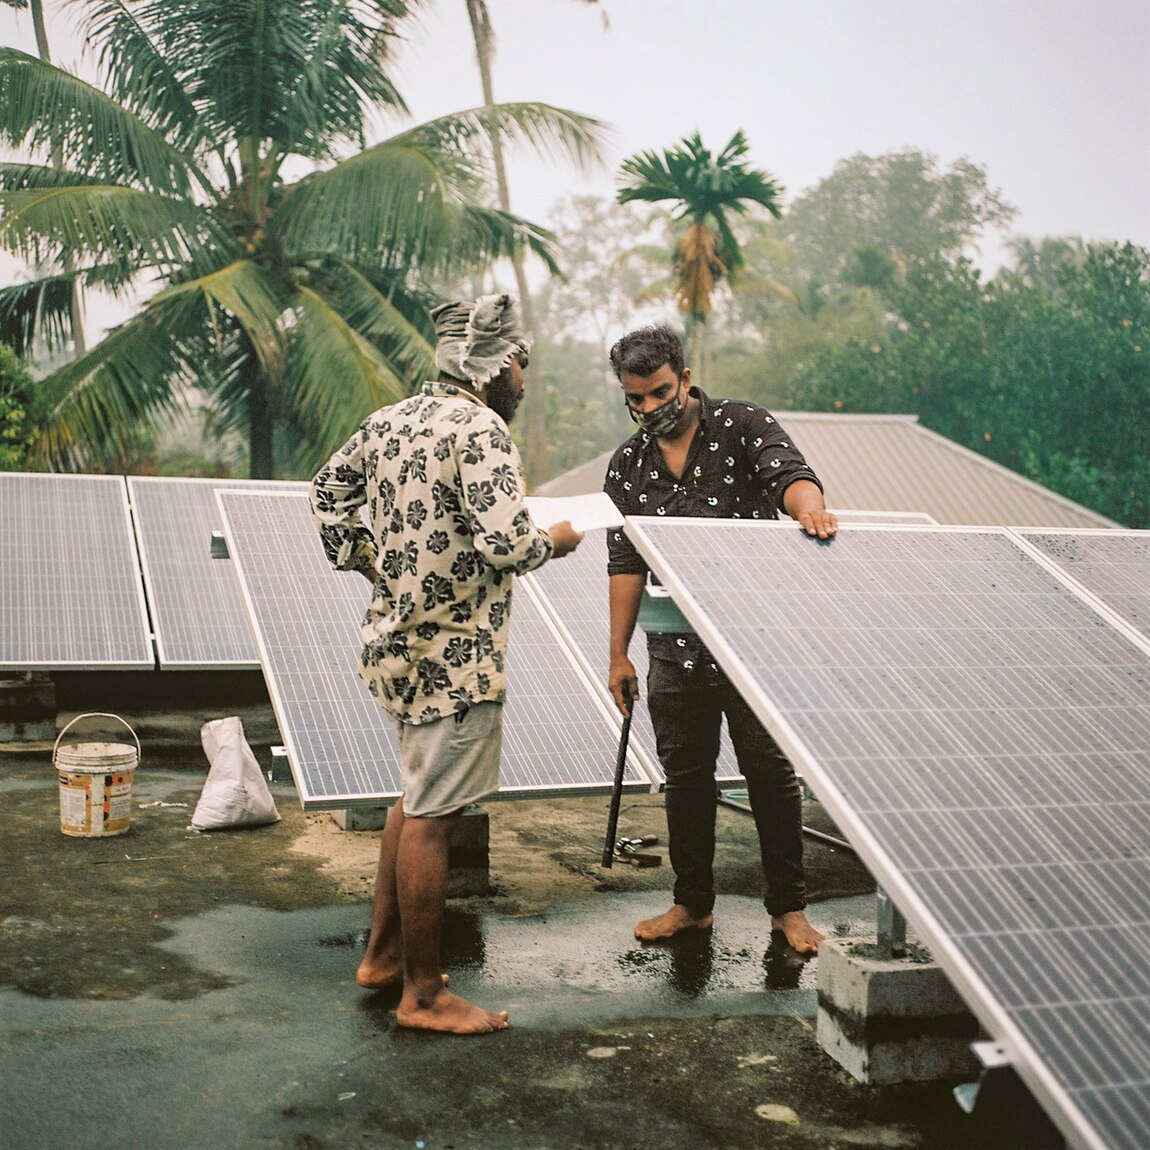 Employees of Tharayil Power, a solar energy company, install solar panels on the roof of a house in Kerala.